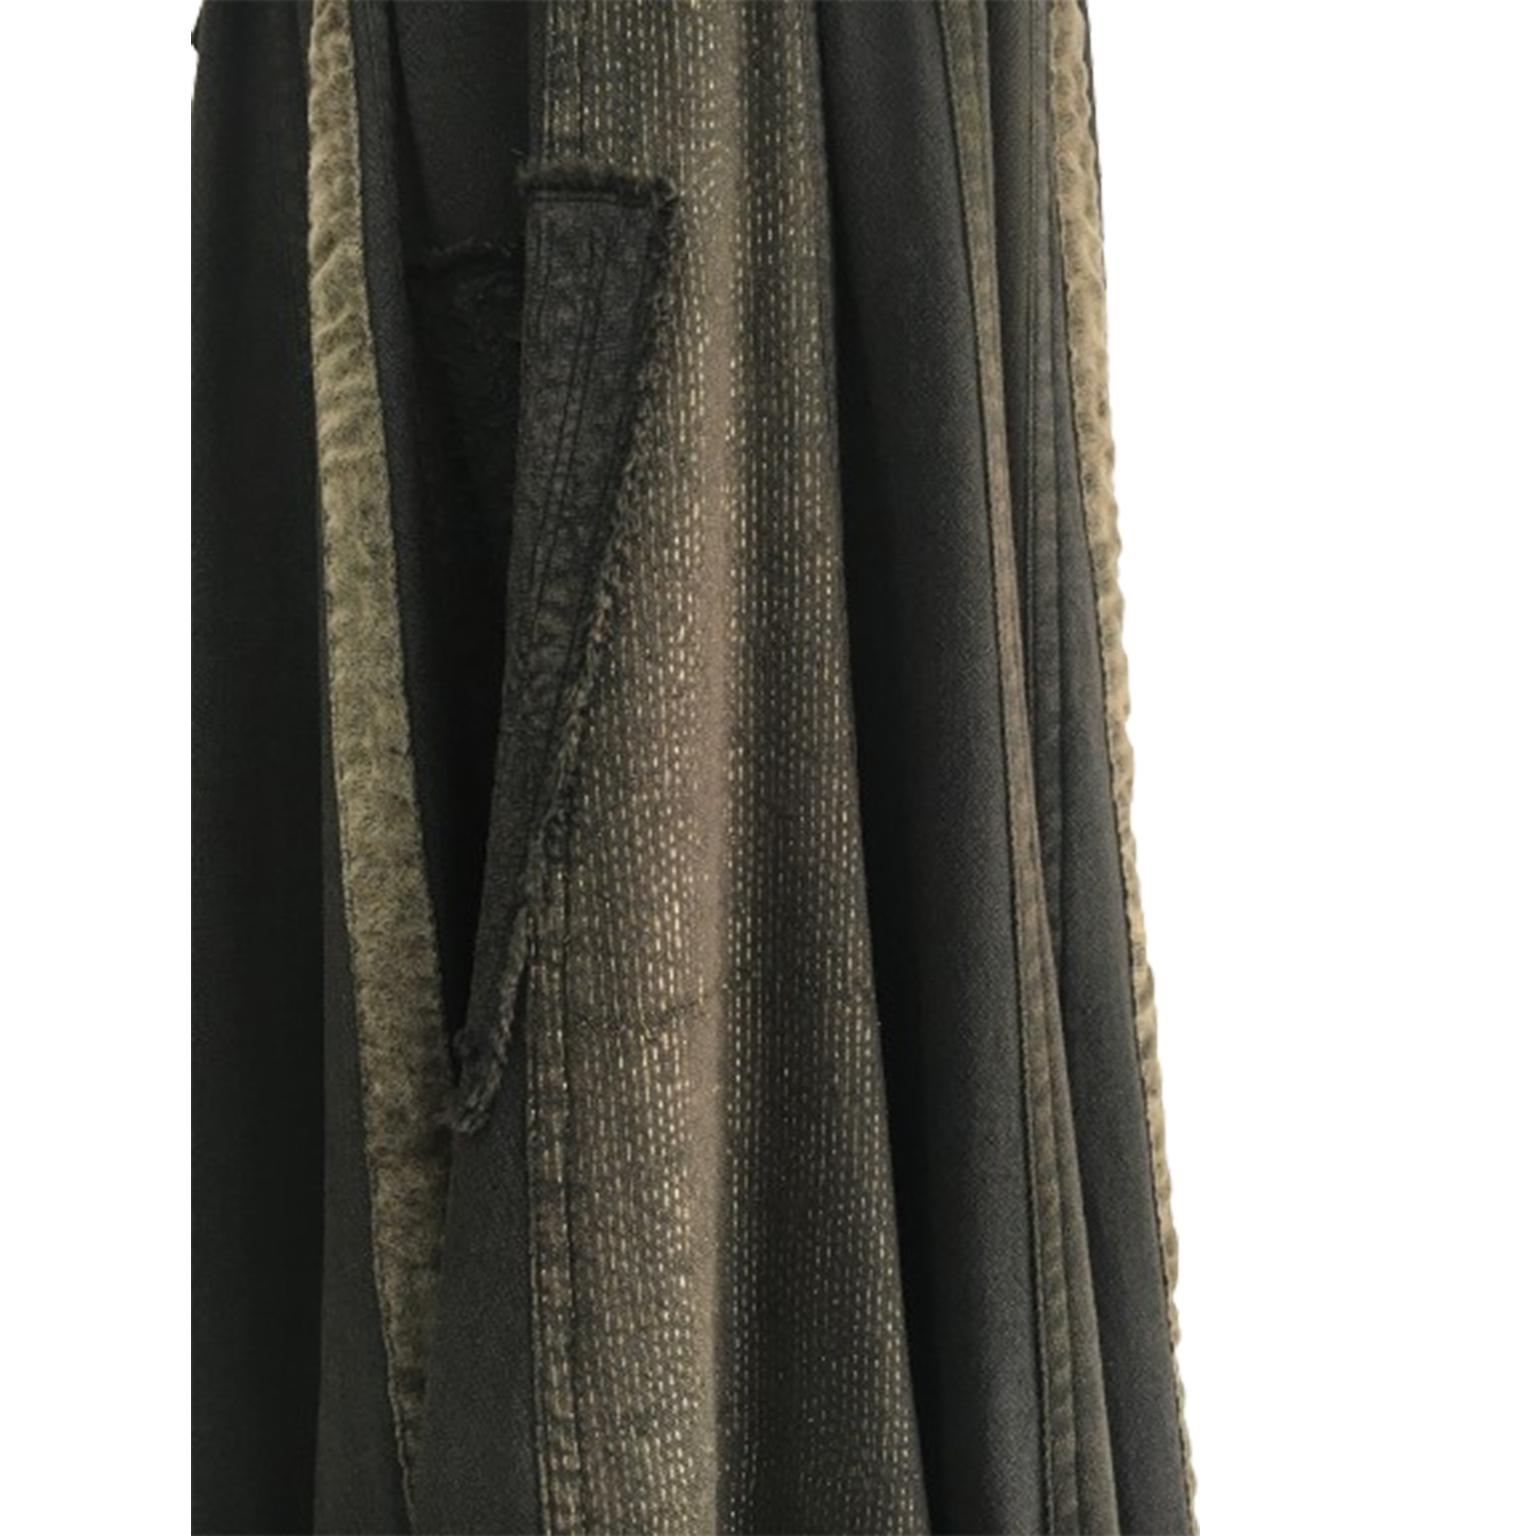 Issey Miyake HaaT Earth Tone Panel Skirt 90s For Sale 4